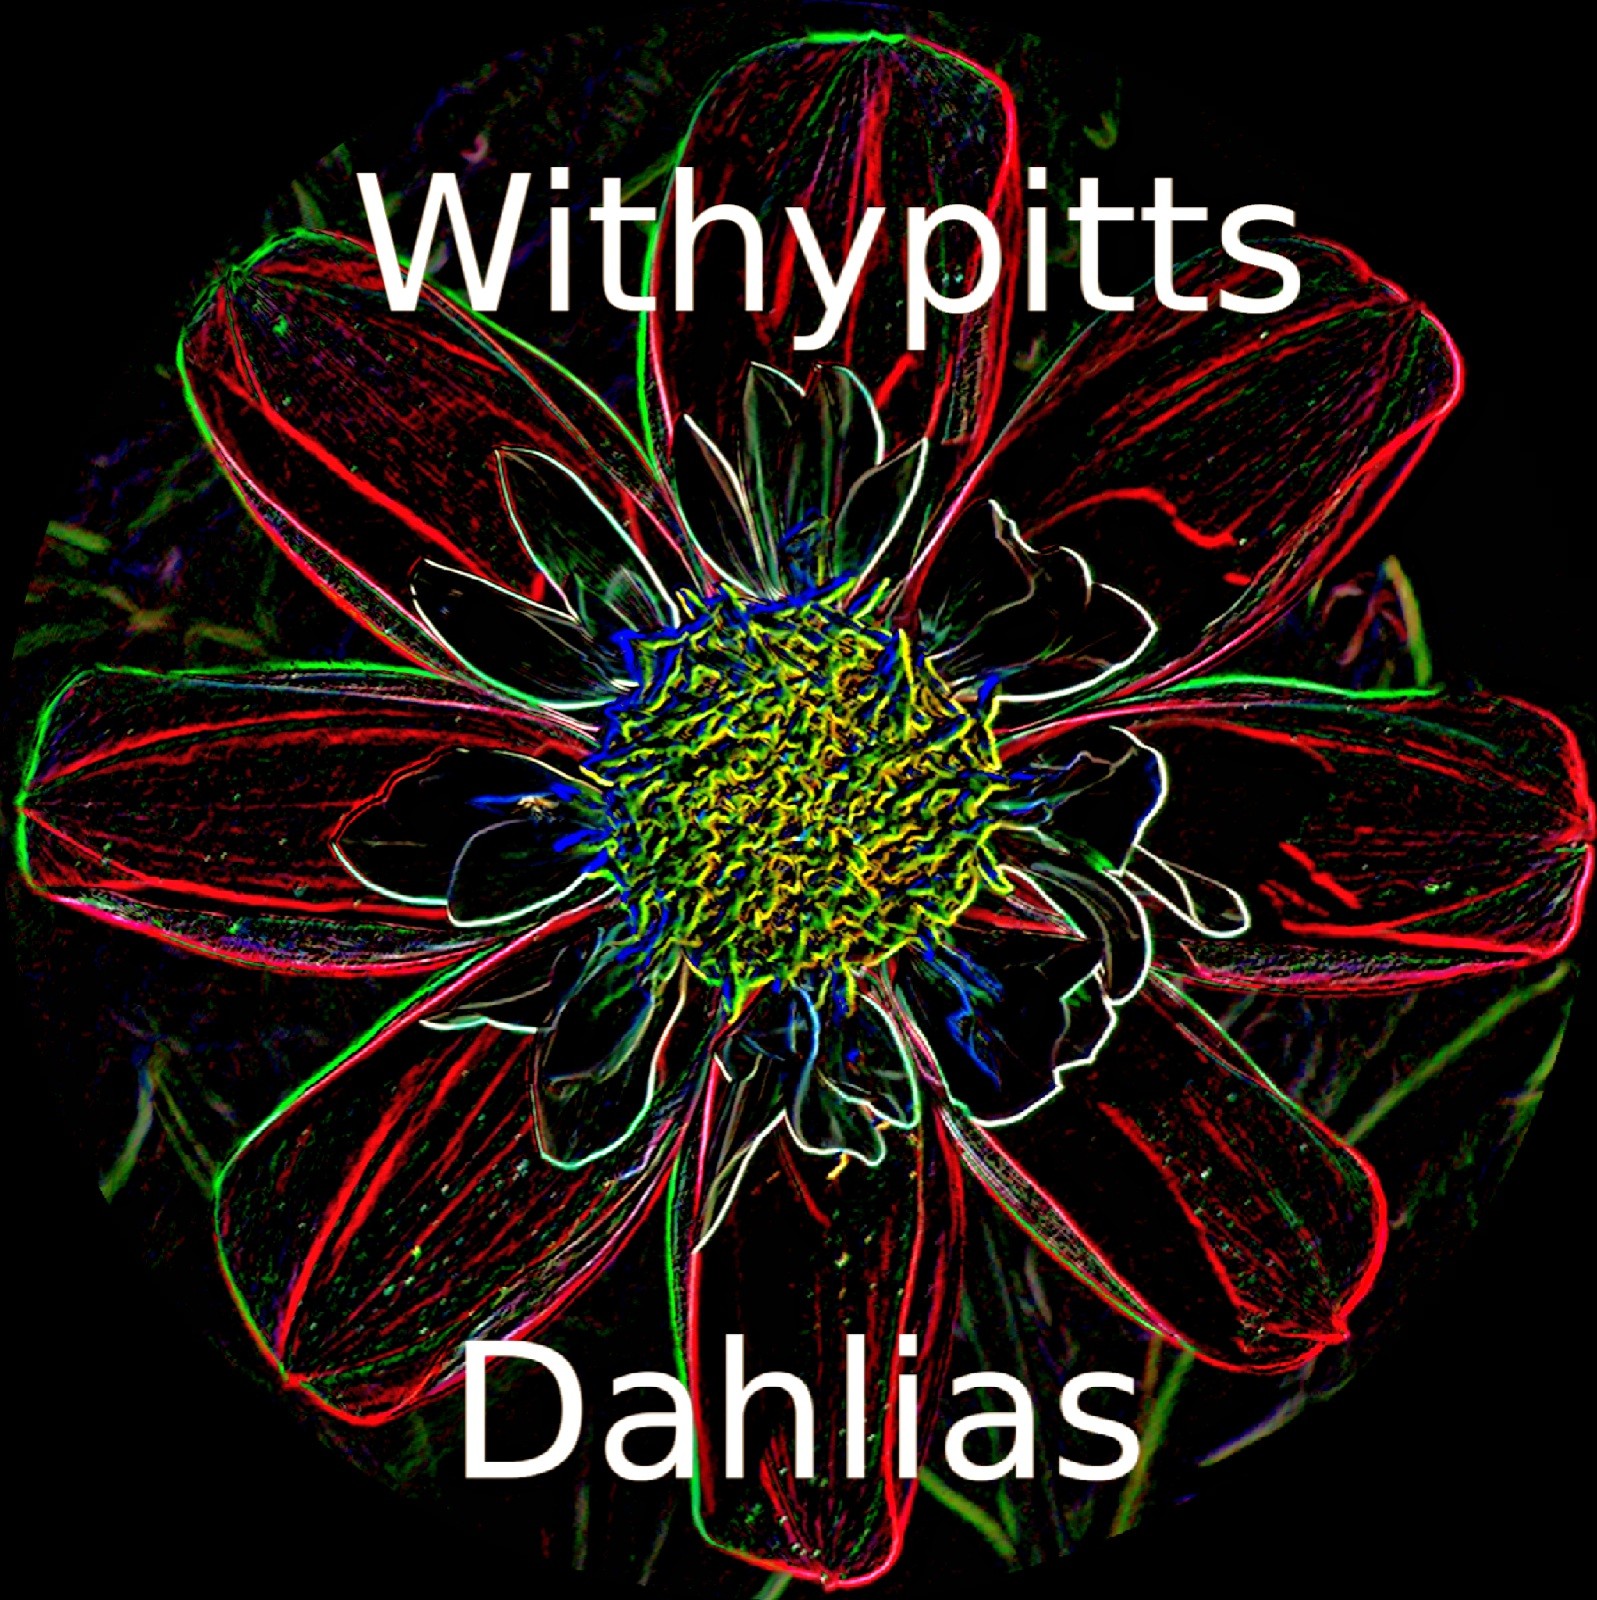 Withypitts Dahlias